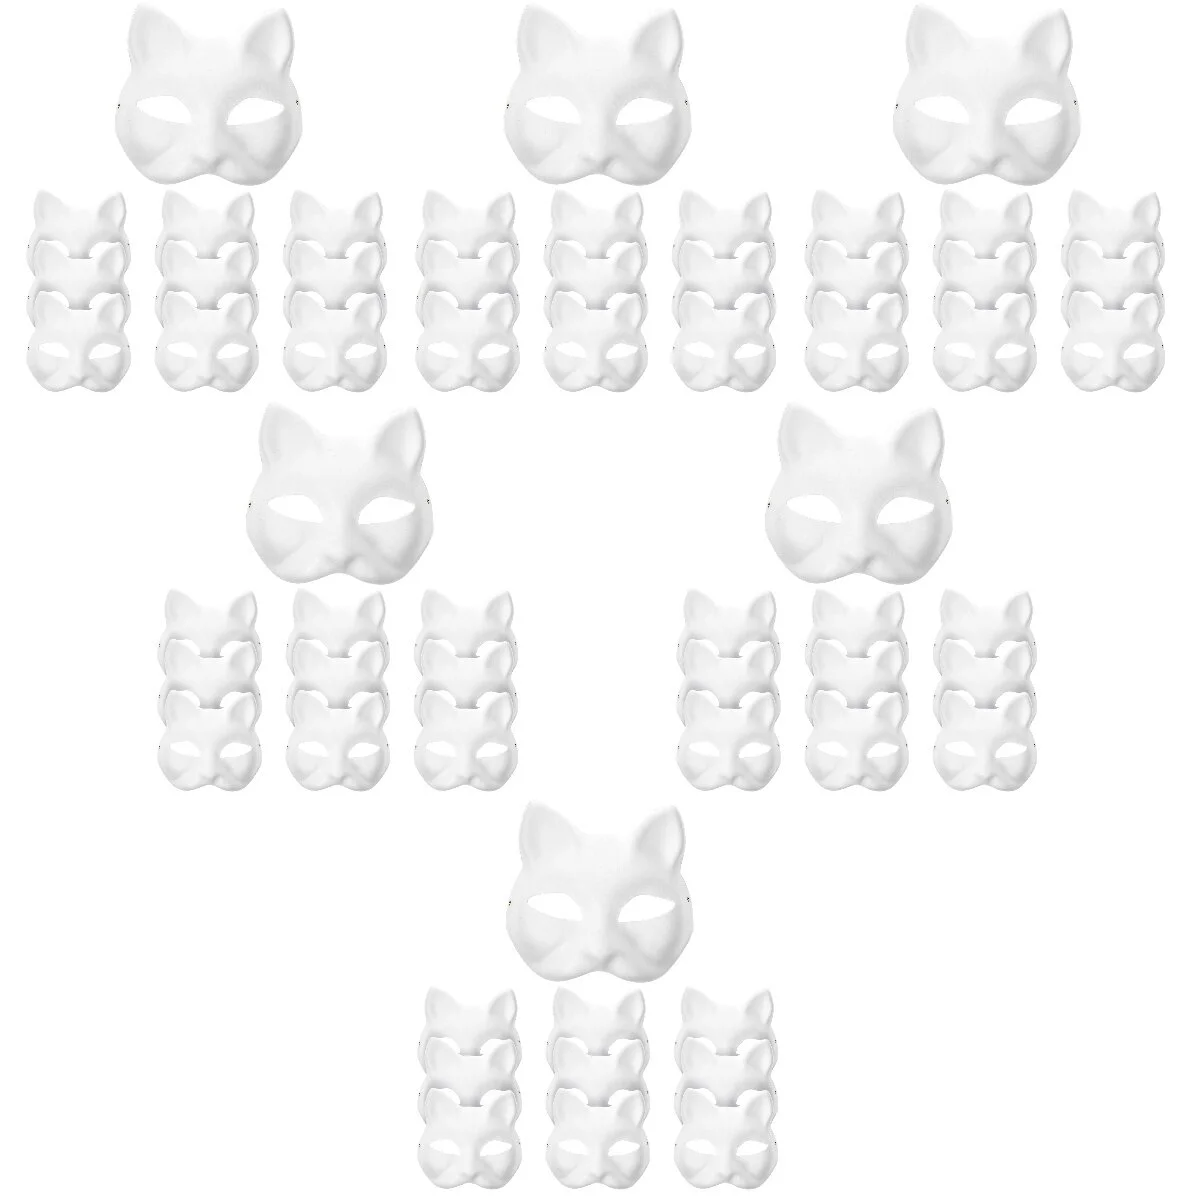 

60 pcs Masquerade Cat DIY Party Masks Props Paintable Blank Masks Party Cosplay Accessories